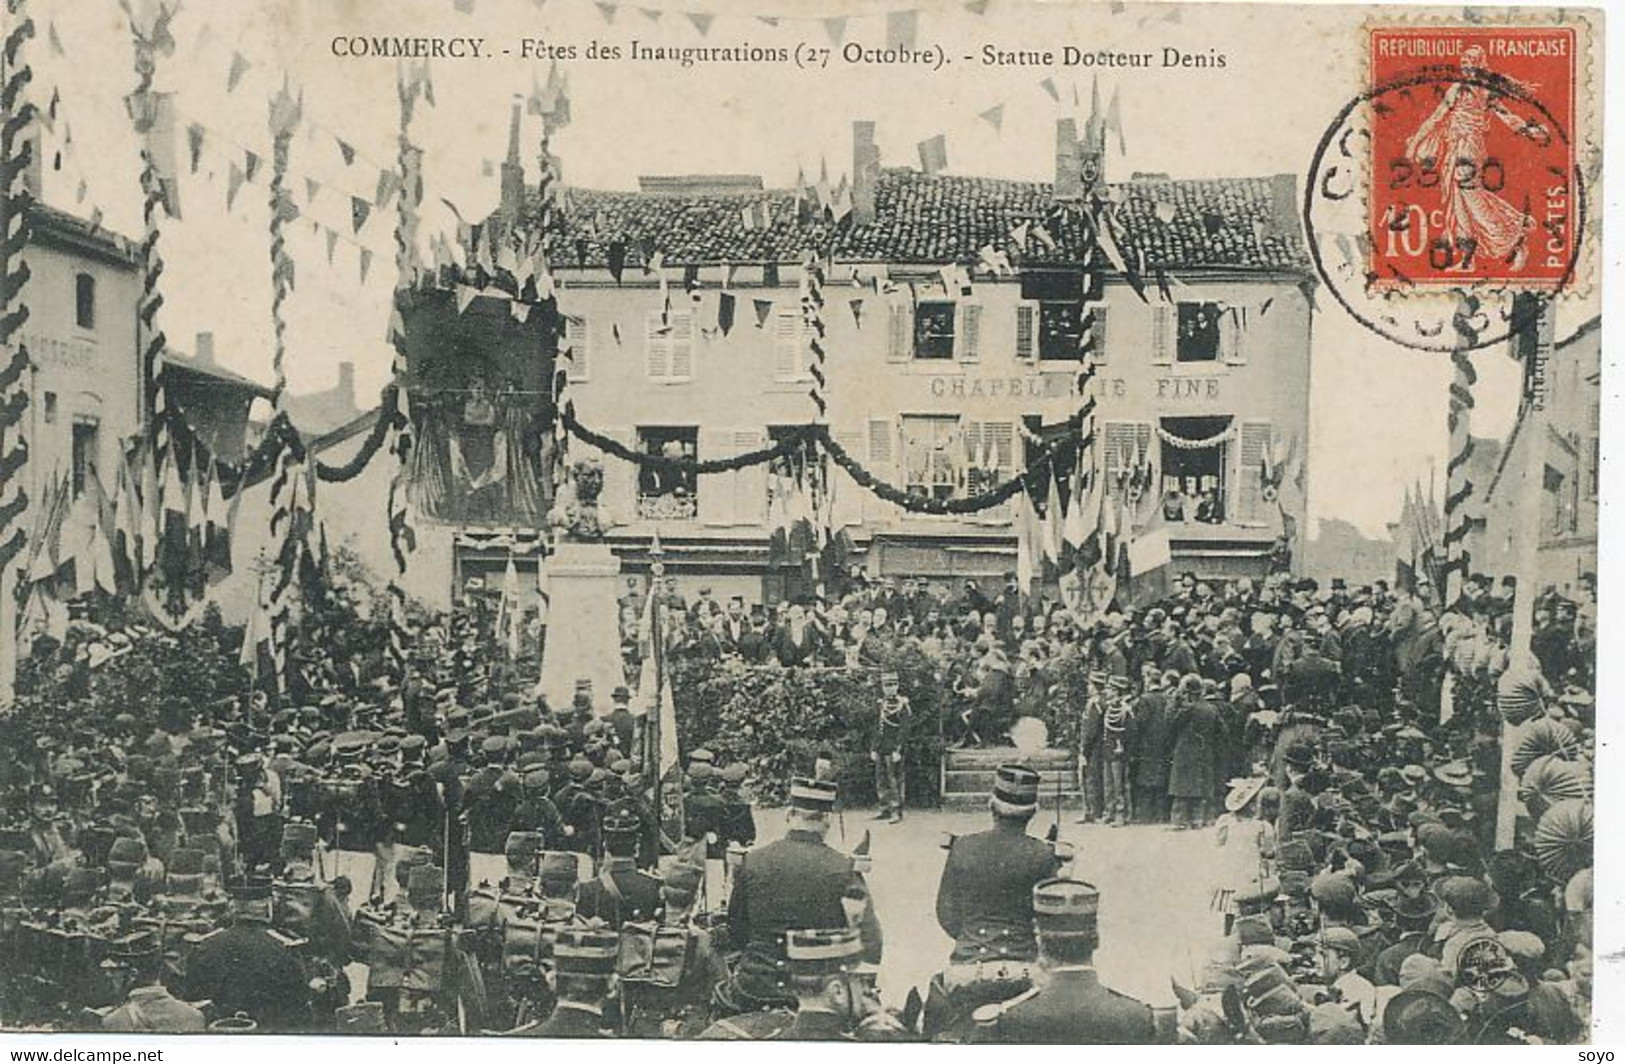 Commercy Fetes Inauguration 27 Octobre Statue Docteur Denis . 1907 - Inaugurations